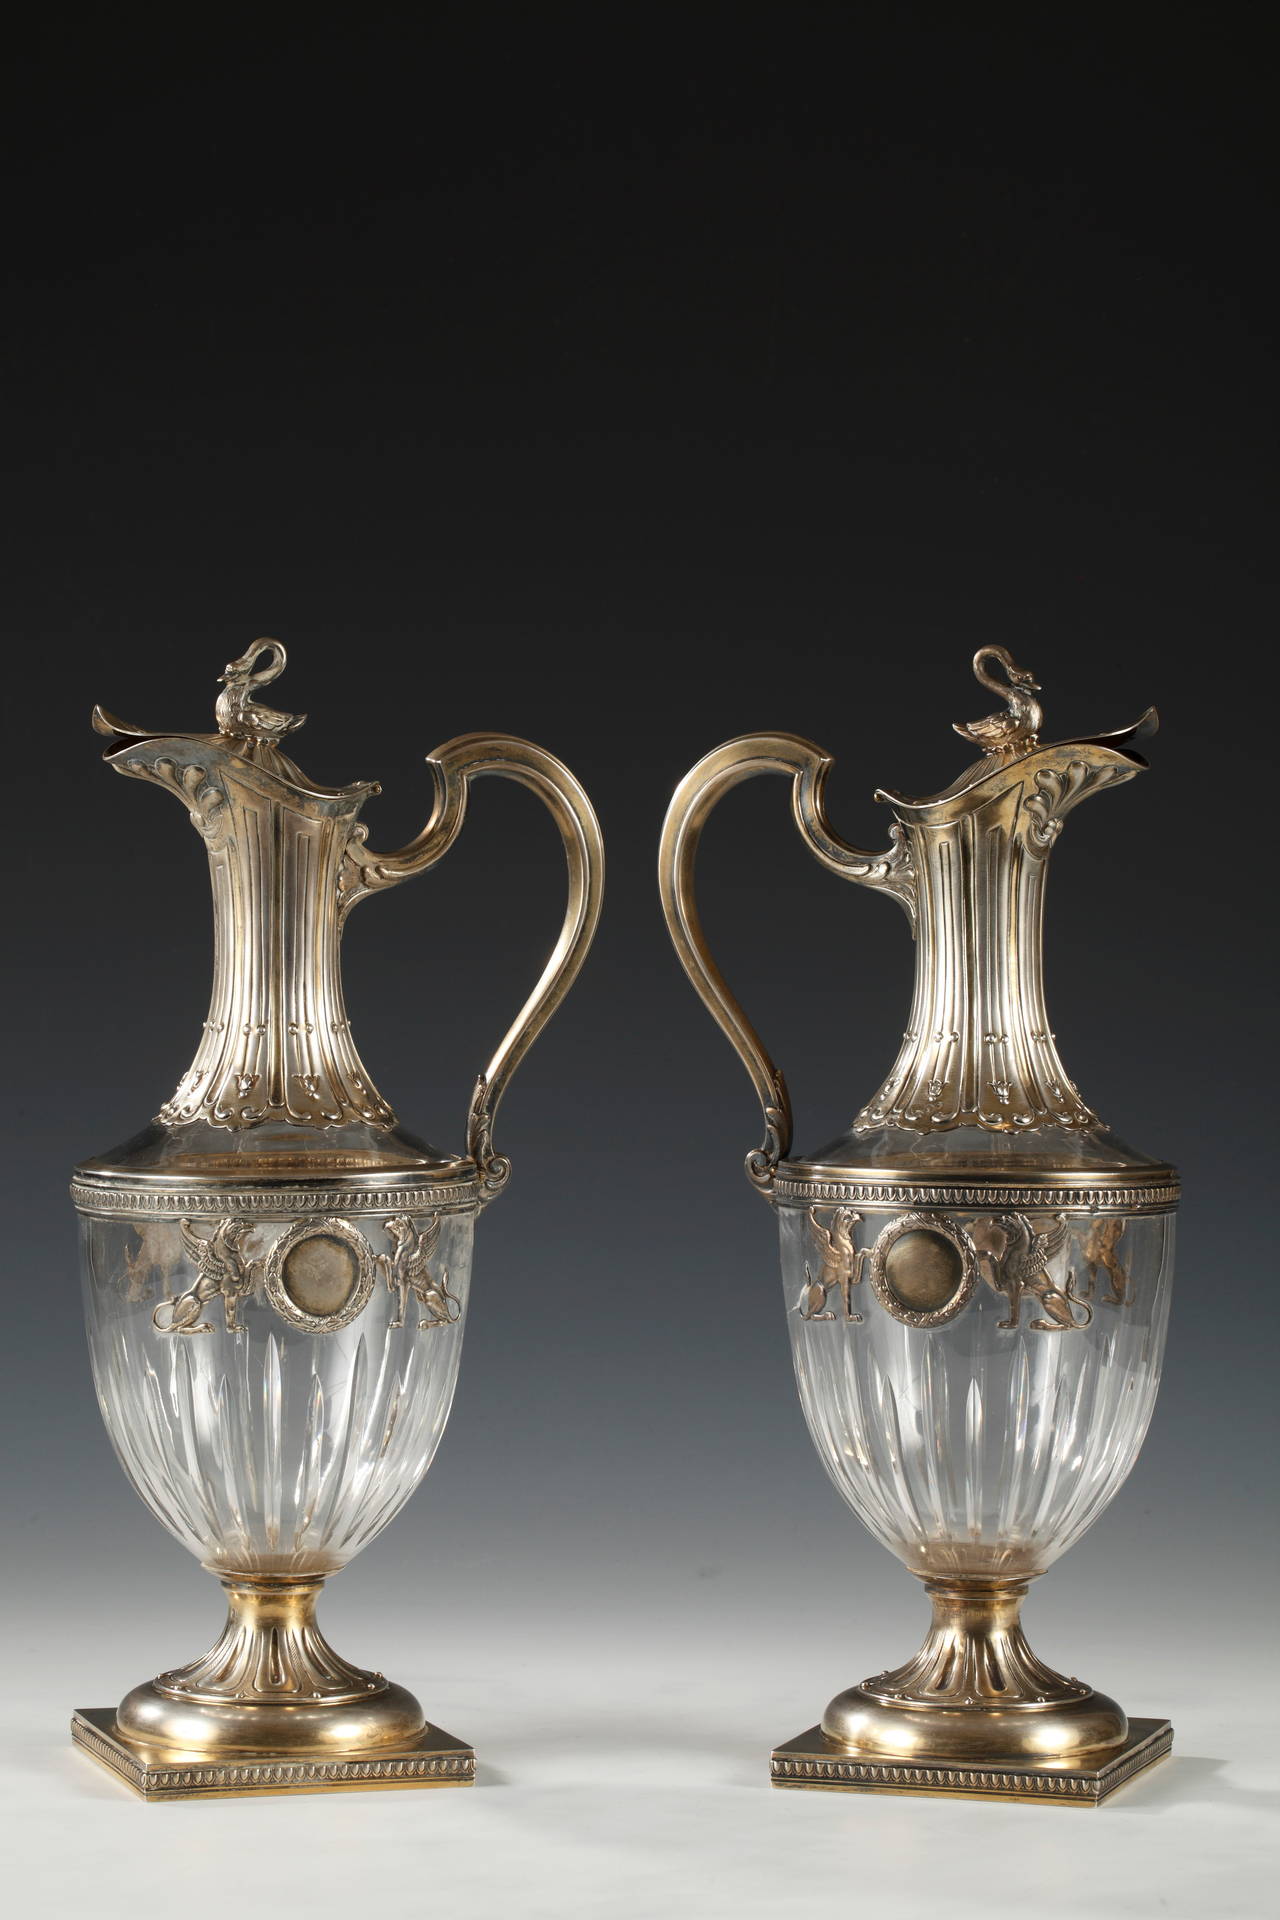 Beautiful pair of engraved and cut rock crystal and silver mount ewers. Silver decor of swans on the top and of griffins on the body. Finish on a latter foot resting on a square plinth.
Mercure Hallmark